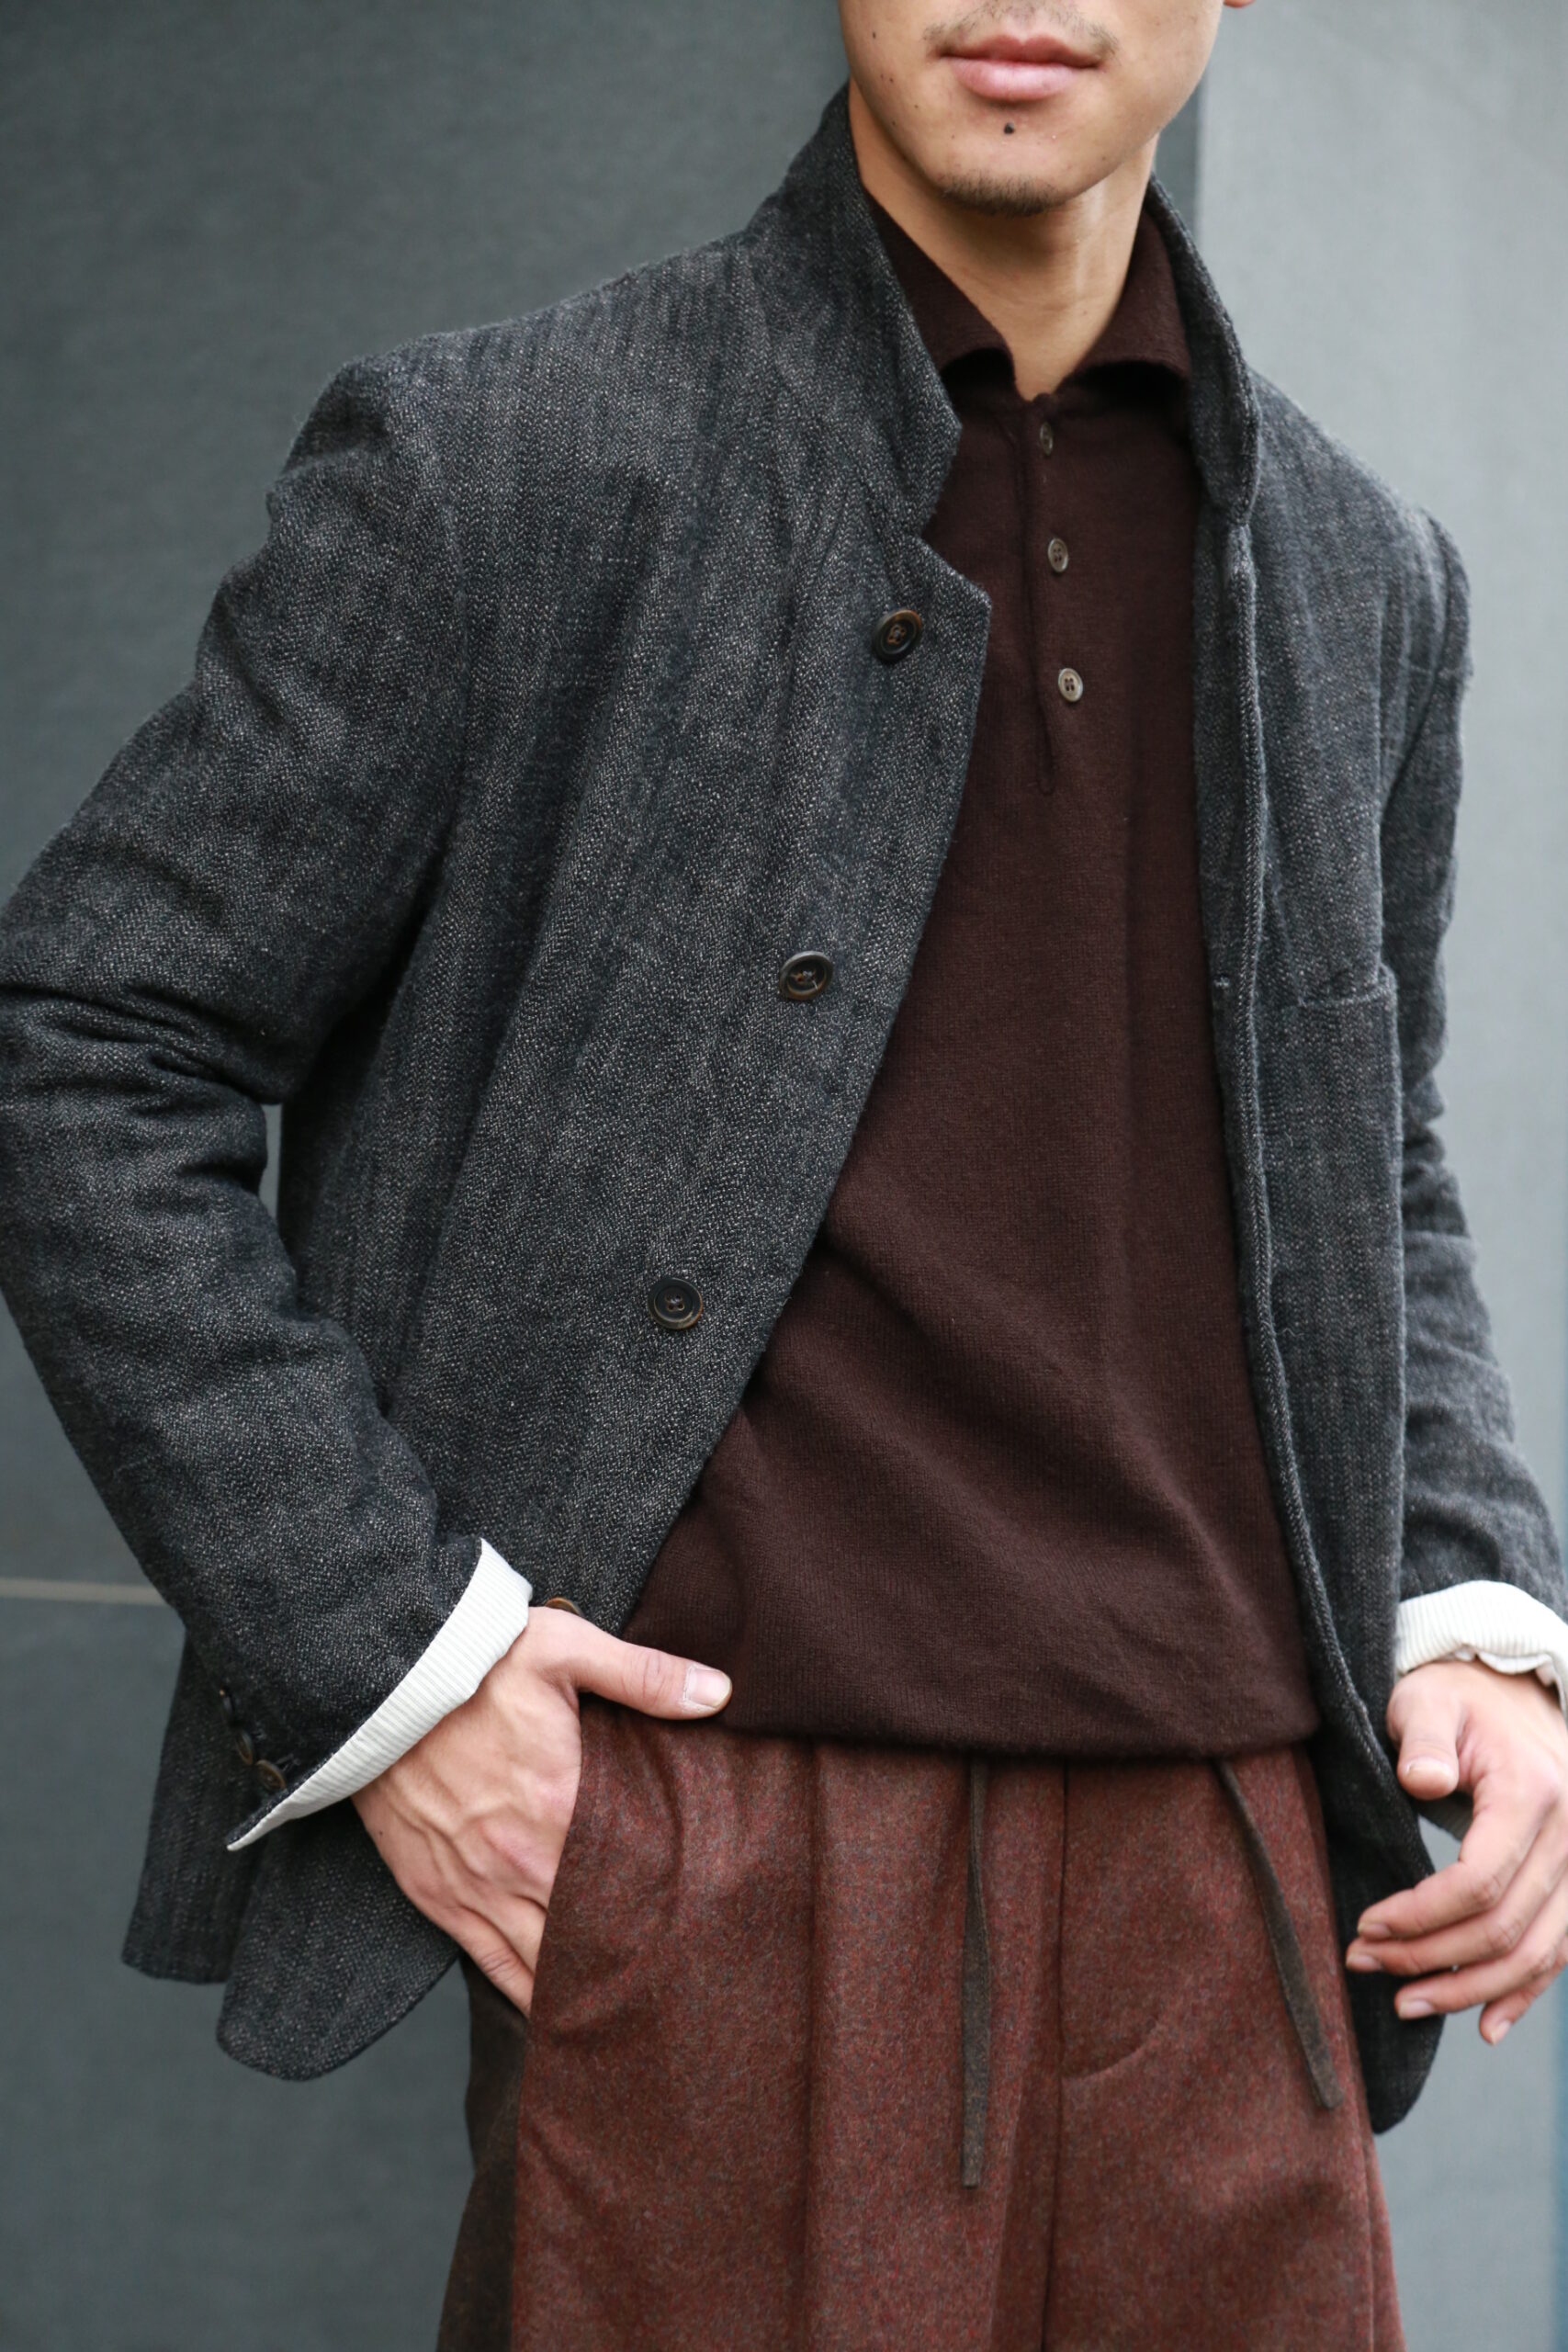 FRANK LEDER AW vol.3 “WOOL SHIRTS & TROUSERS”   ARCH TOKYO